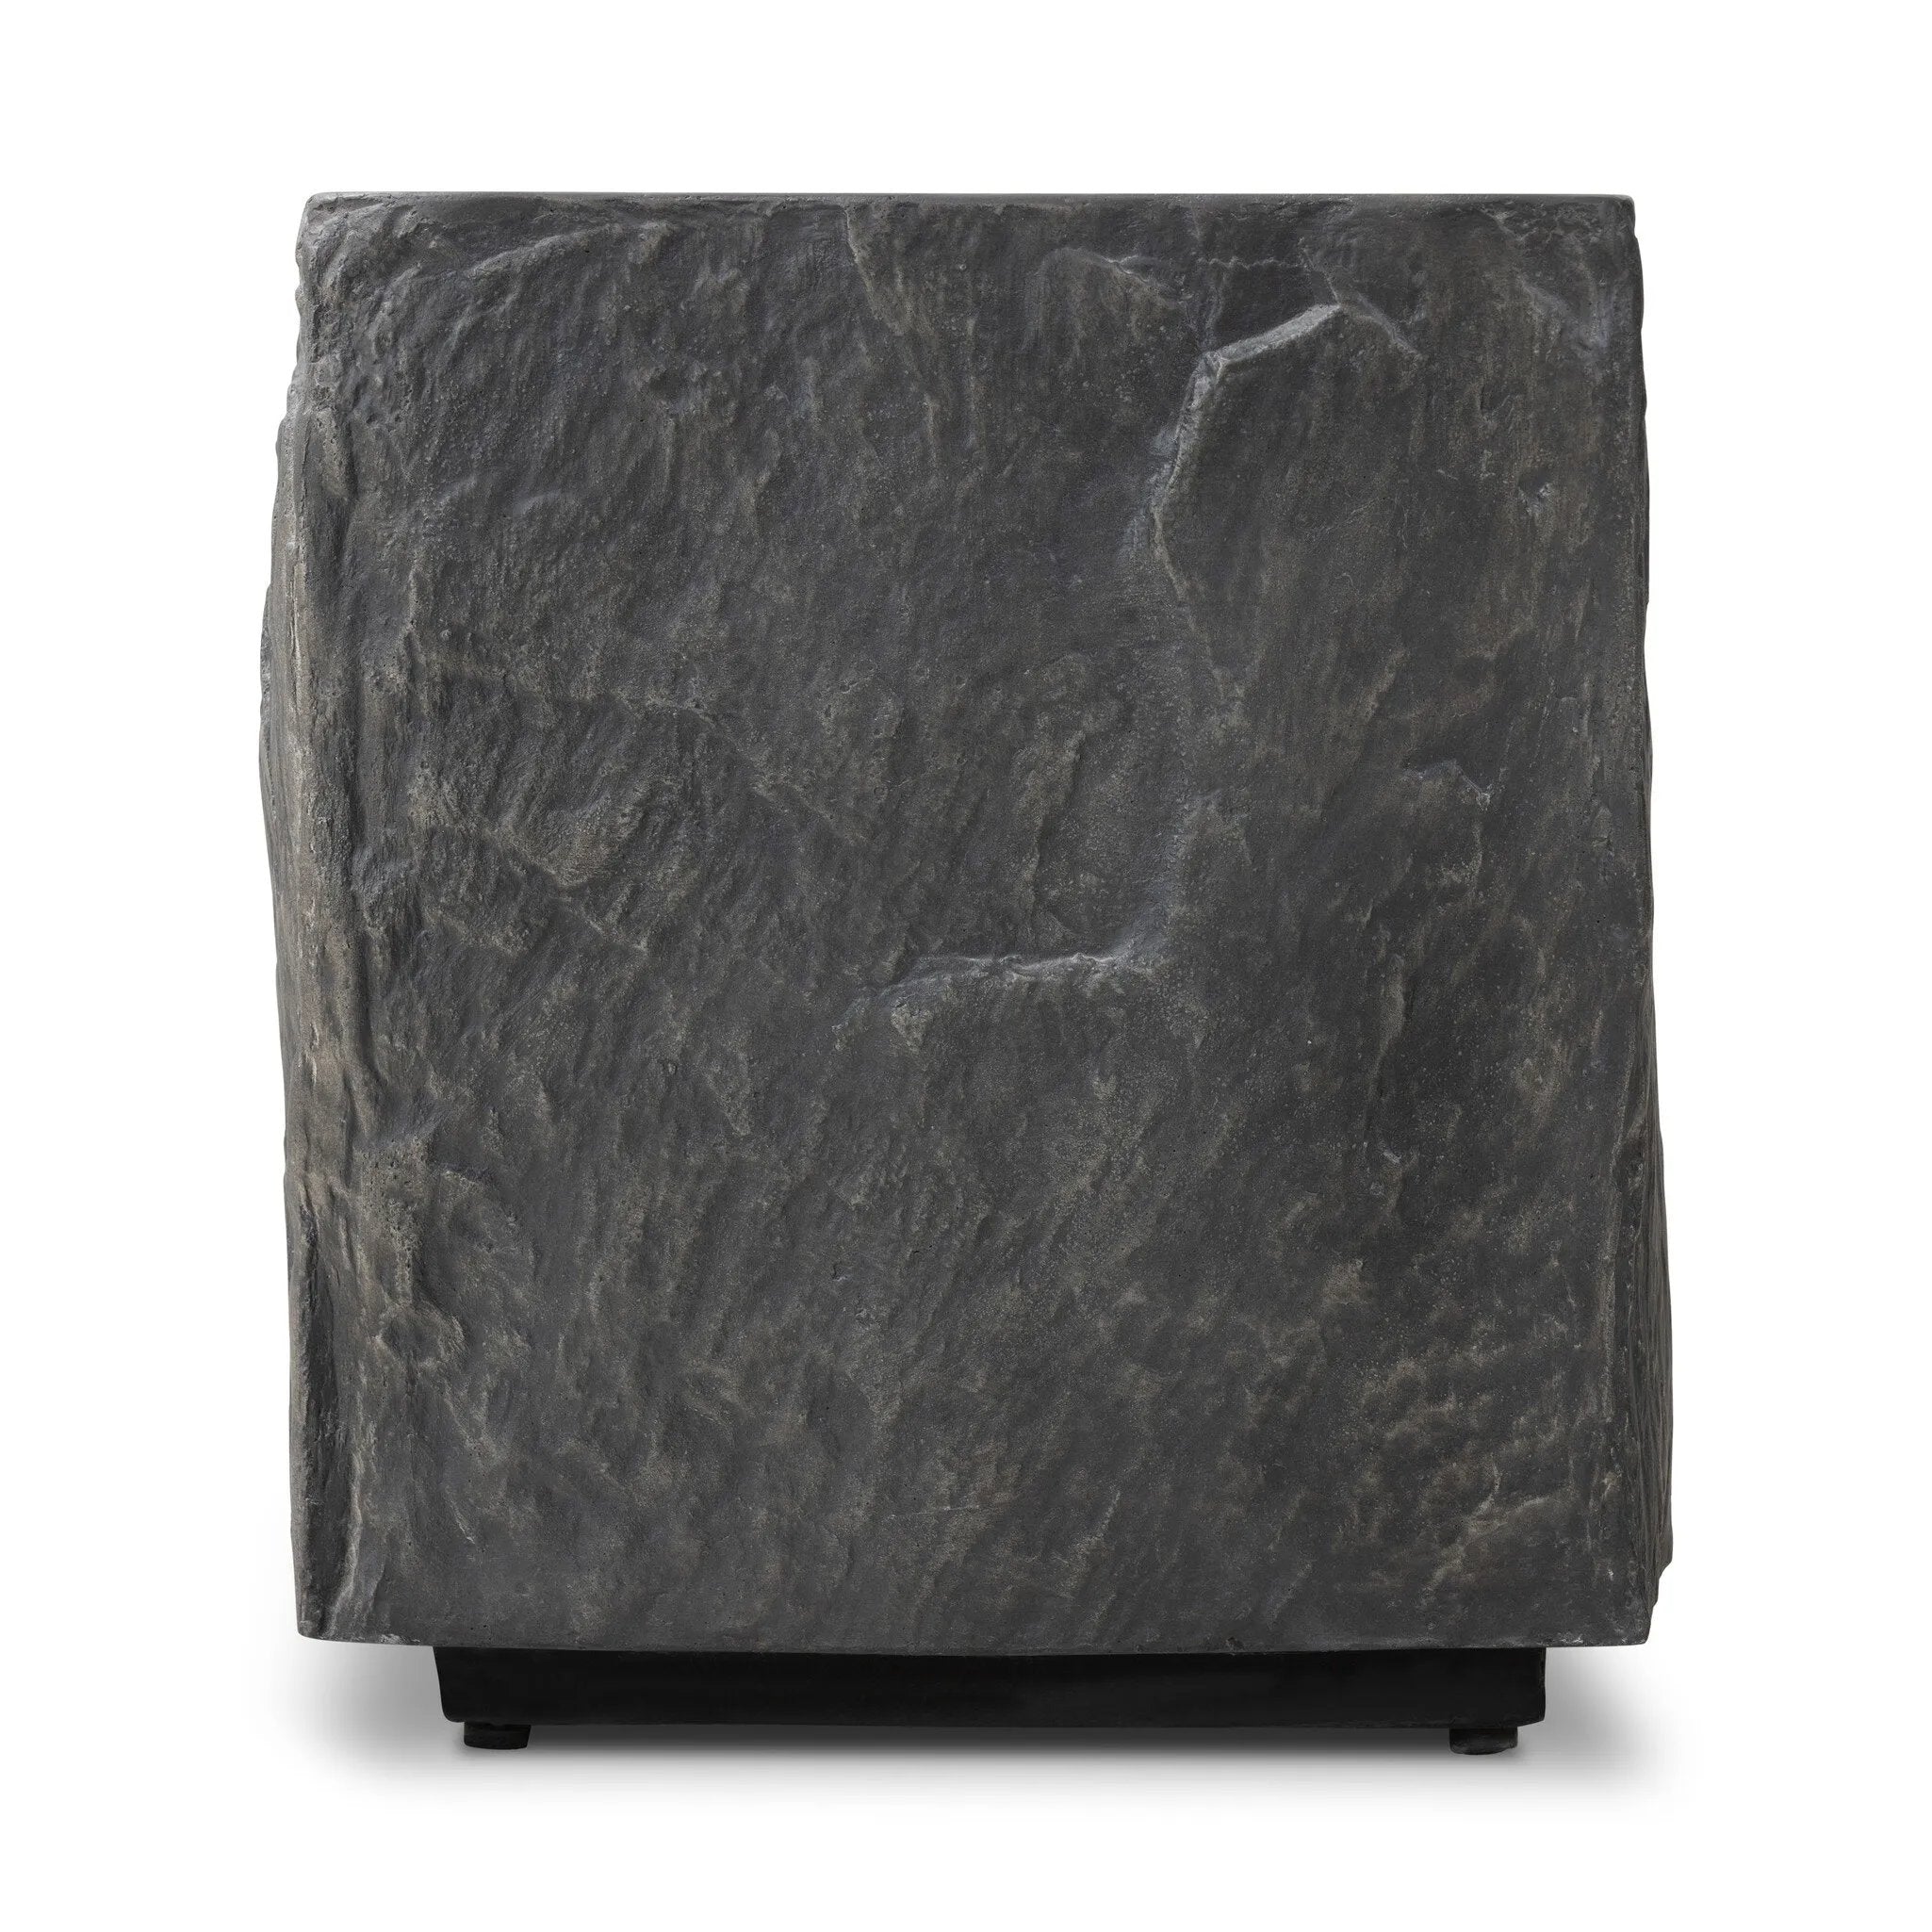 Cast black concrete features heavily textured sides that resemble natural slate, paired with a smoothed tabletop.Collection: Chandle Amethyst Home provides interior design, new home construction design consulting, vintage area rugs, and lighting in the Washington metro area.